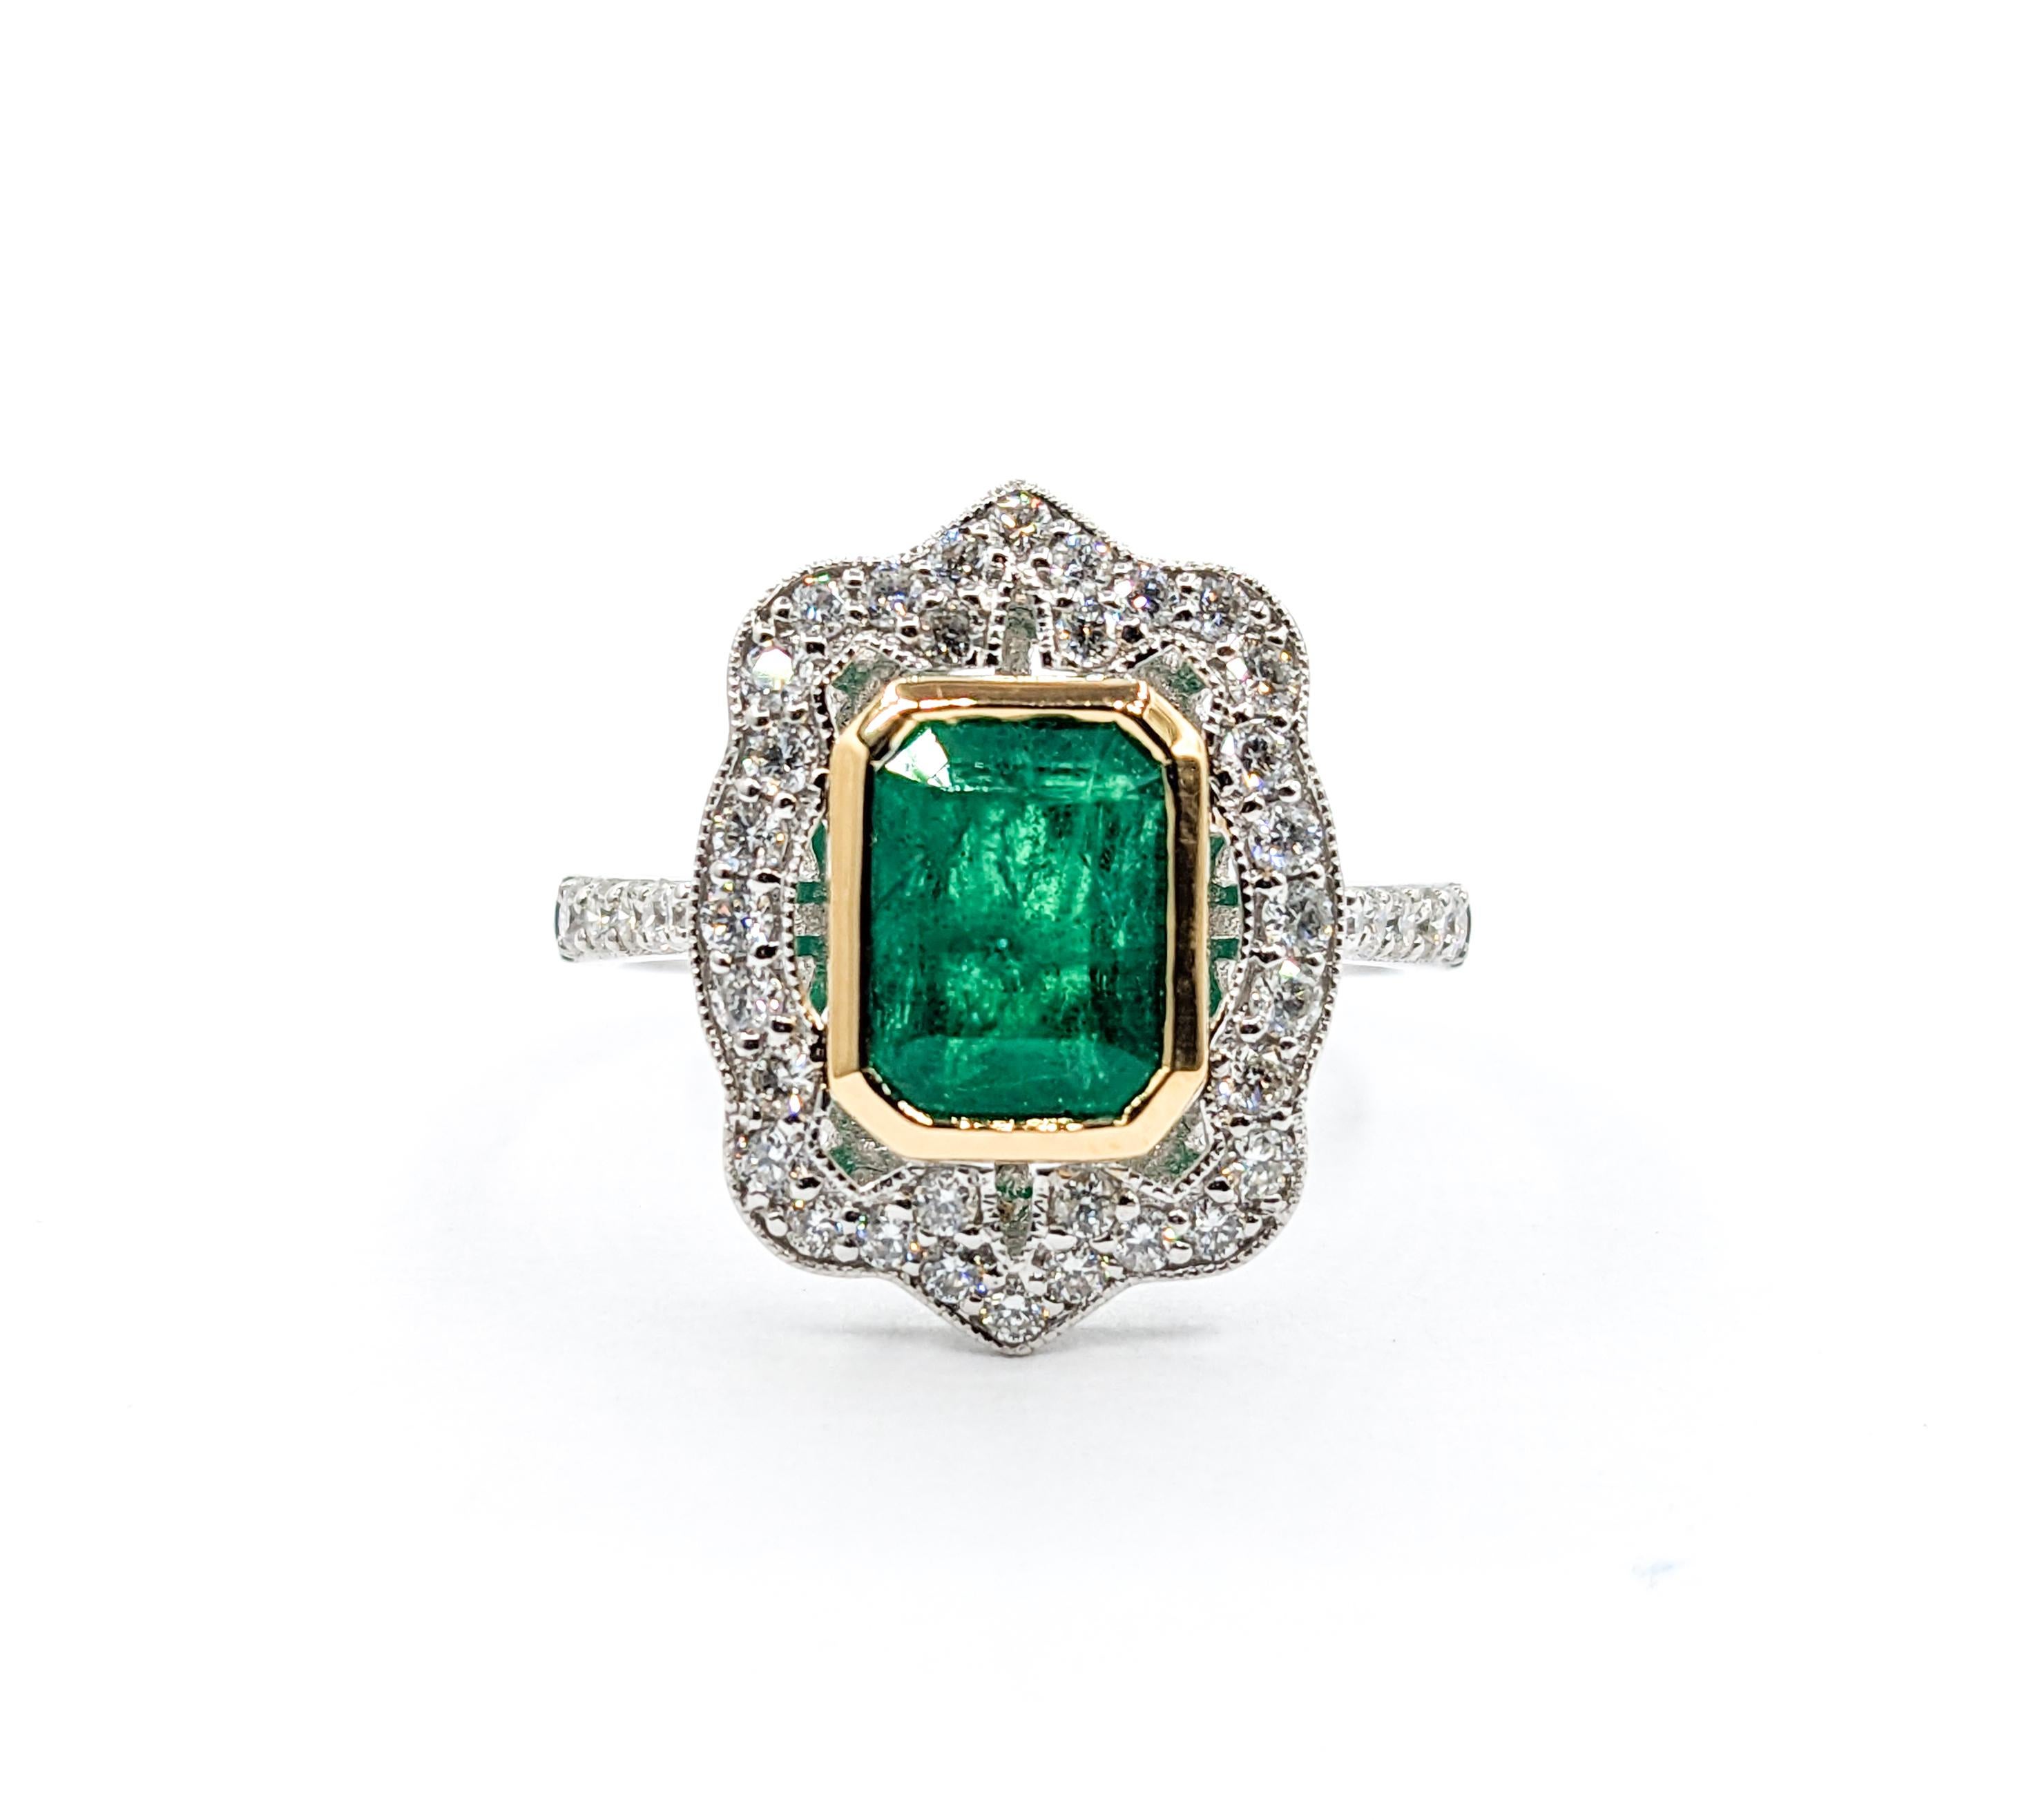 Two-Tone Emerald & Diamond Cocktail Ring

Experience the allure of this exquisite ring, crafted with precision in 18kt white & yellow gold. It features an array of .53 carats of round diamonds, each with an I clarity and a near-colorless white